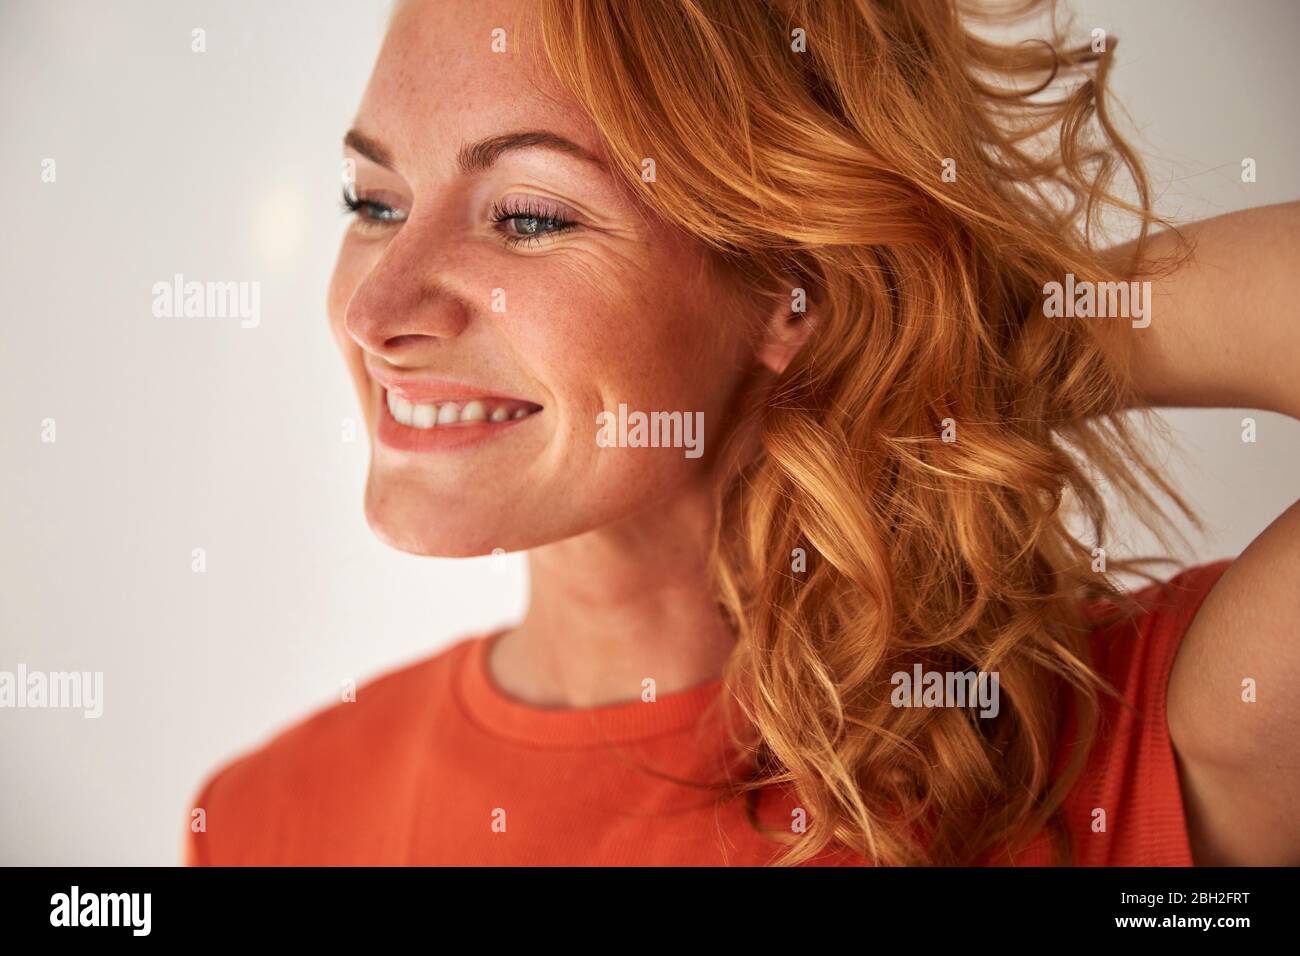 Portrait of red-haired woman, hand in hair, looking sideways Stock Photo